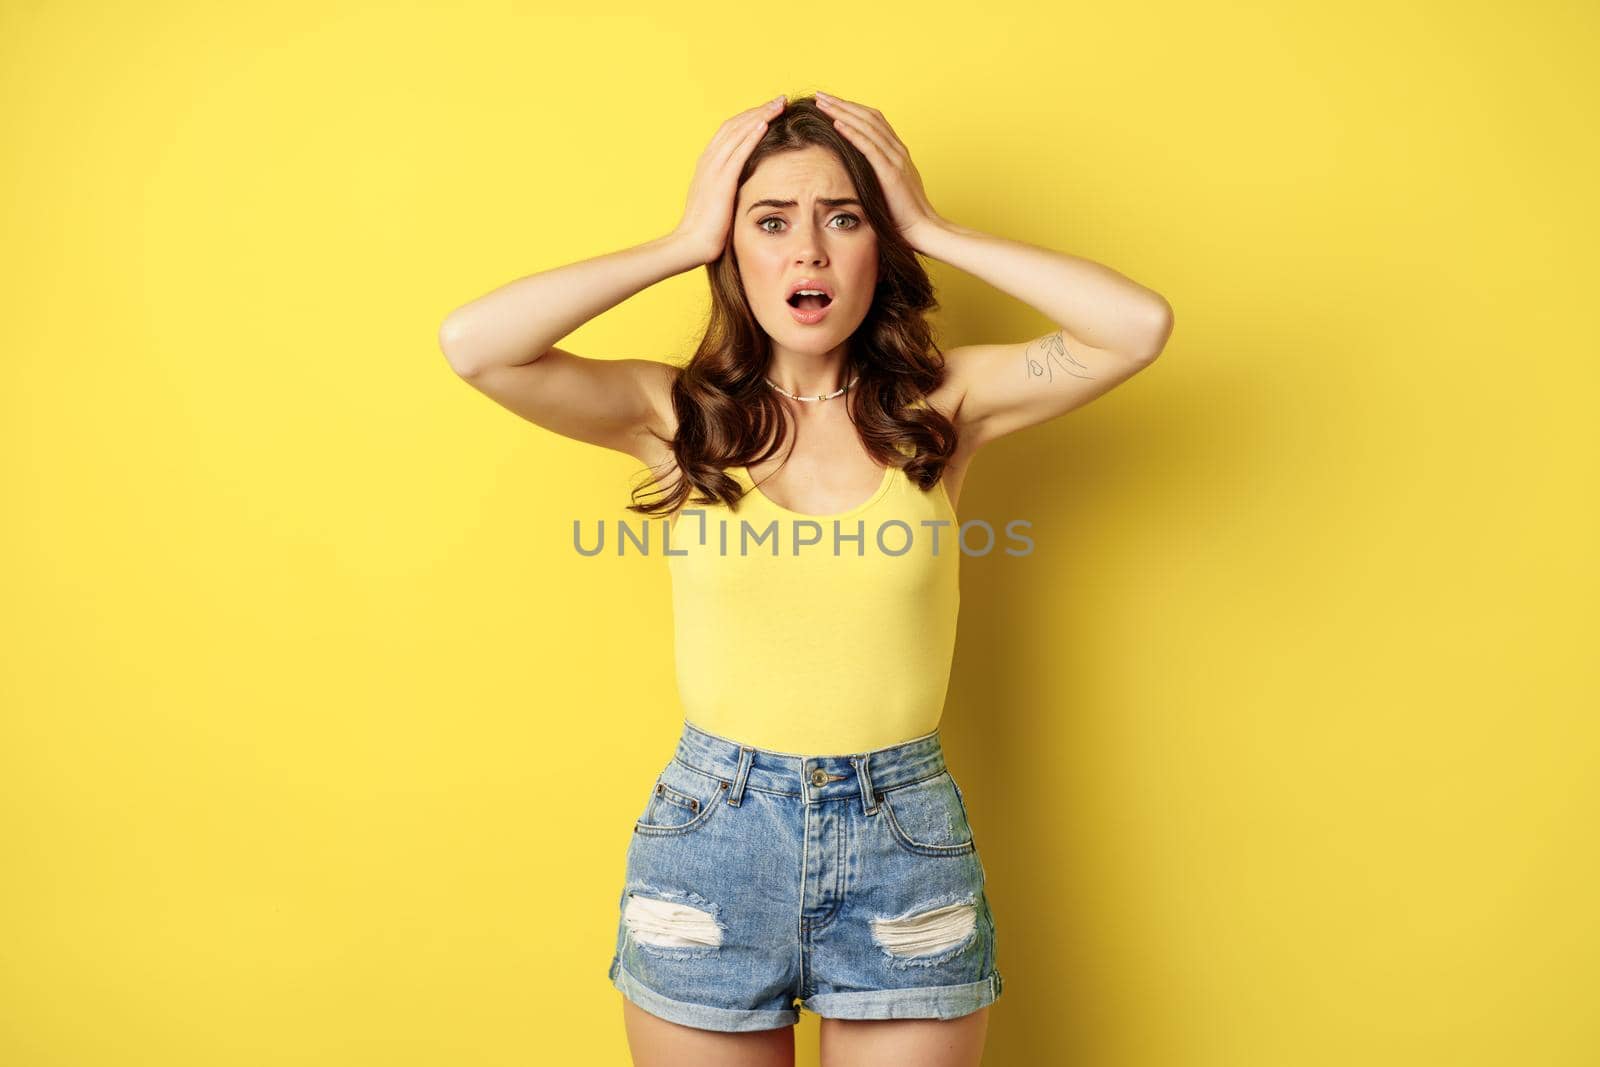 Troubled and shocked woman holding hands on head, panicking, feeling distressed and anxious, having problem, standing over yellow background.